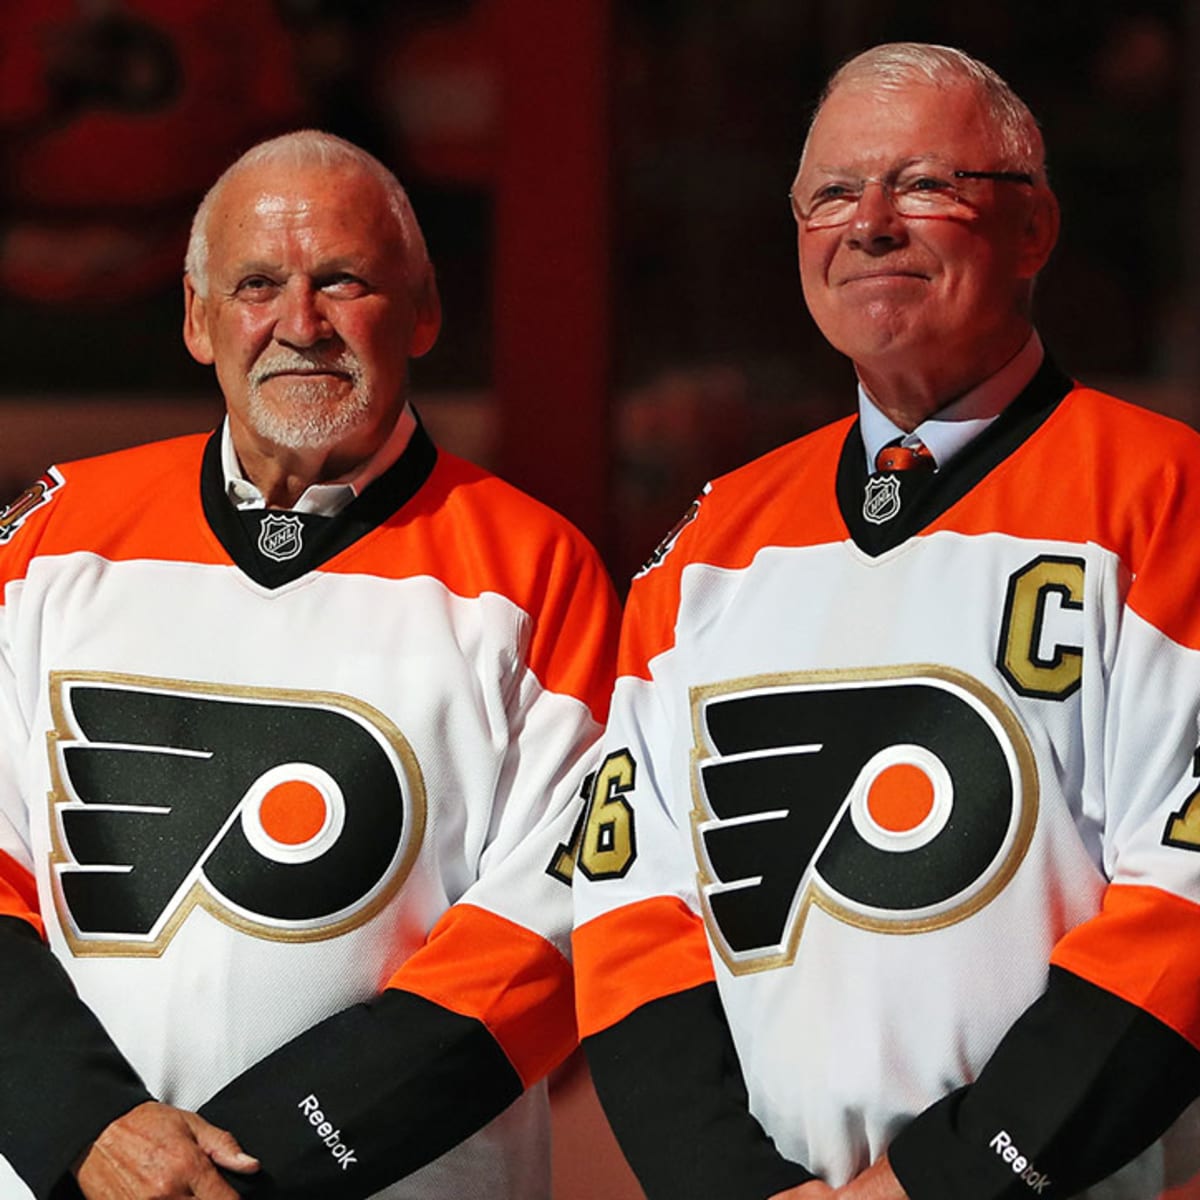 Philadelphia Flyers celebrate and learn from alumni - Sports Illustrated